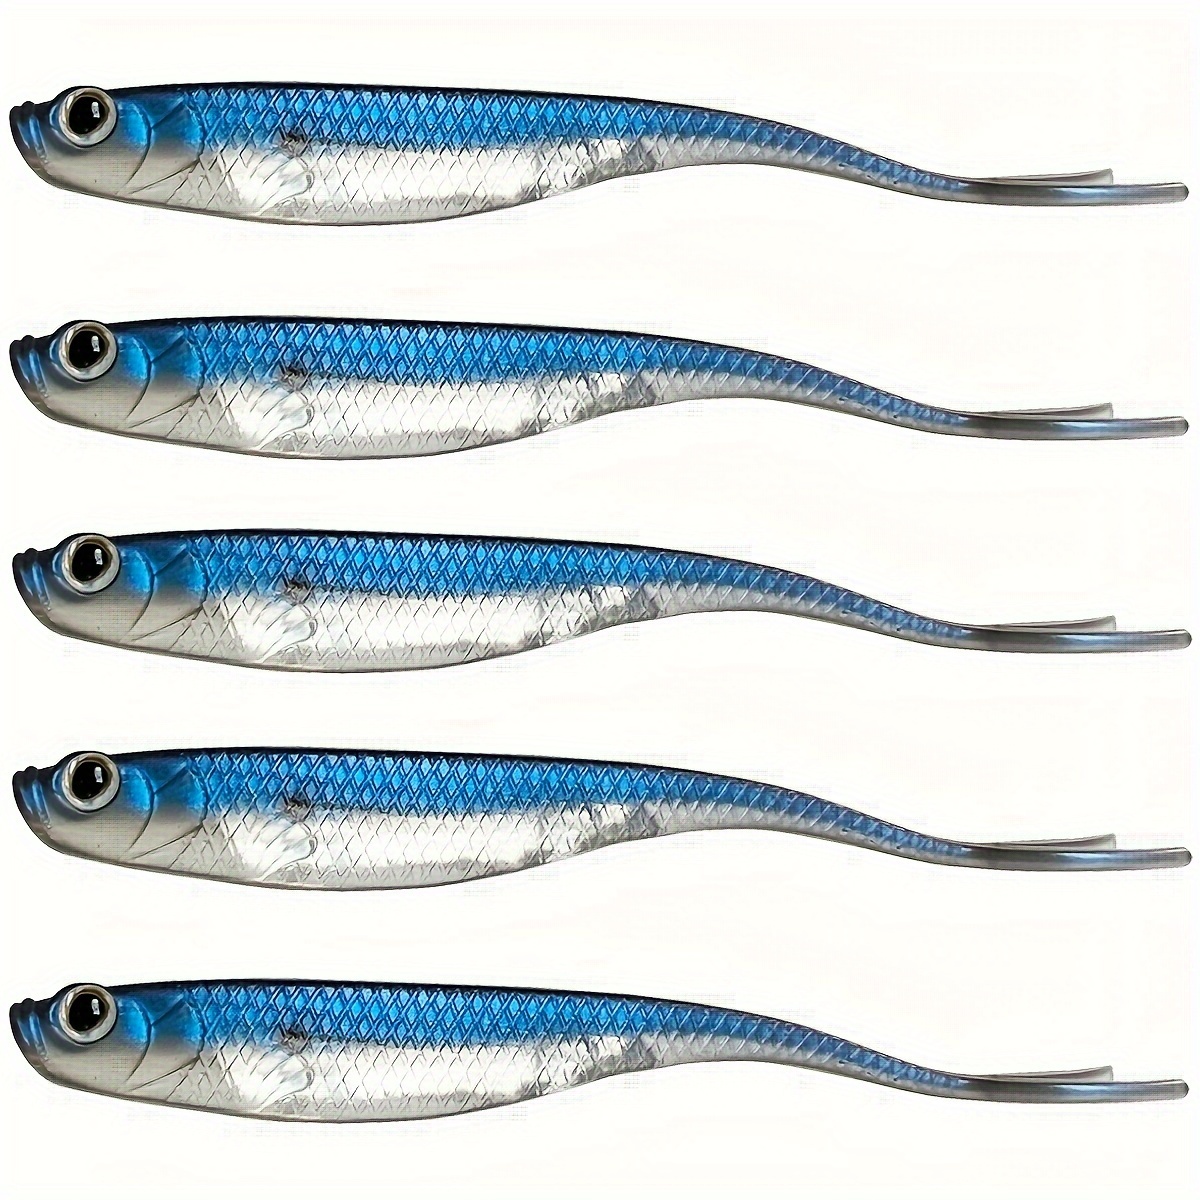 Crappie Fluke Soft Plastic Fishing Bait Lure Tackle Crappie Bass